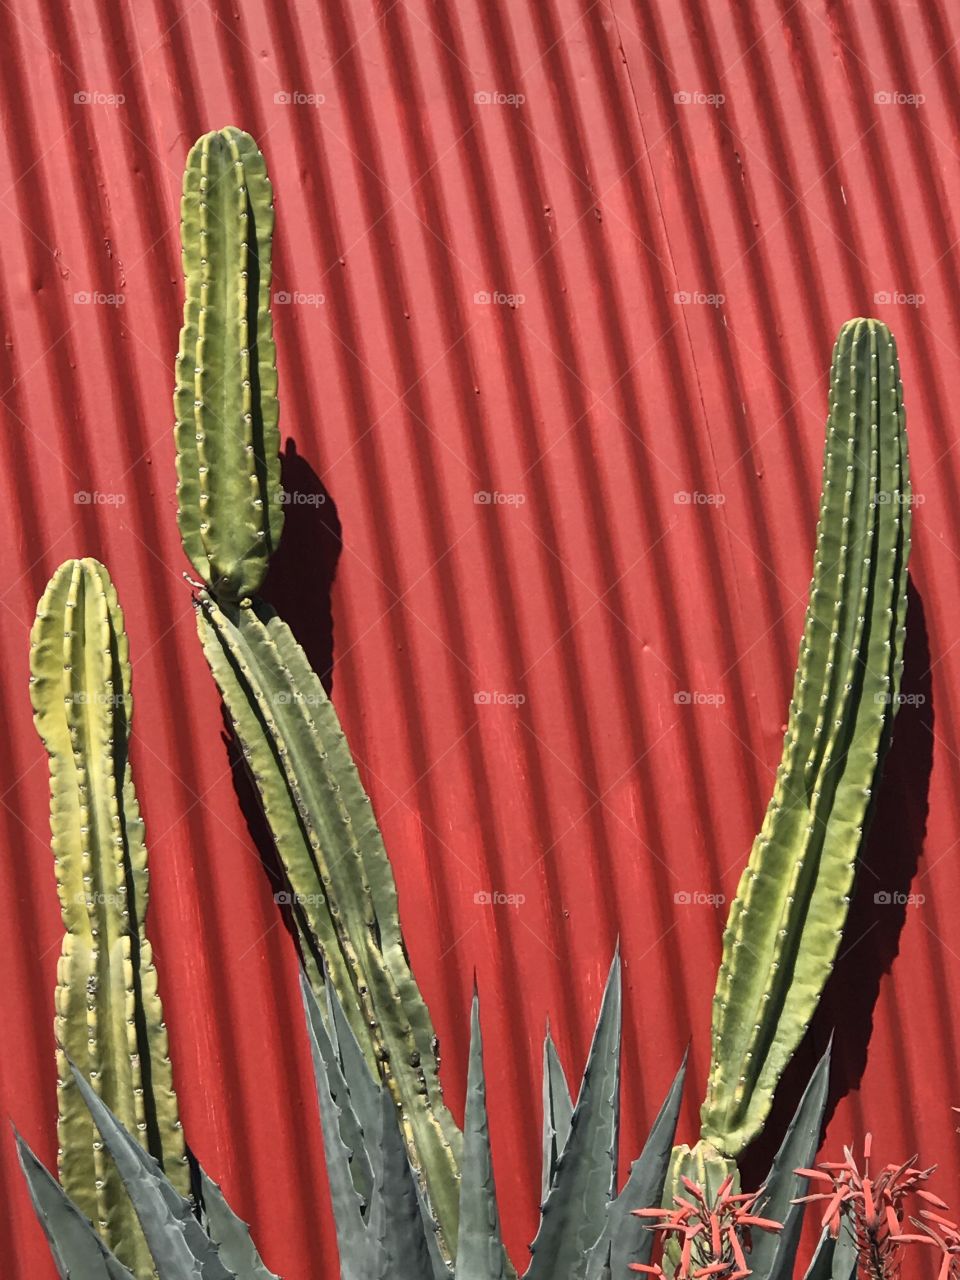 Cactus with a red wall background